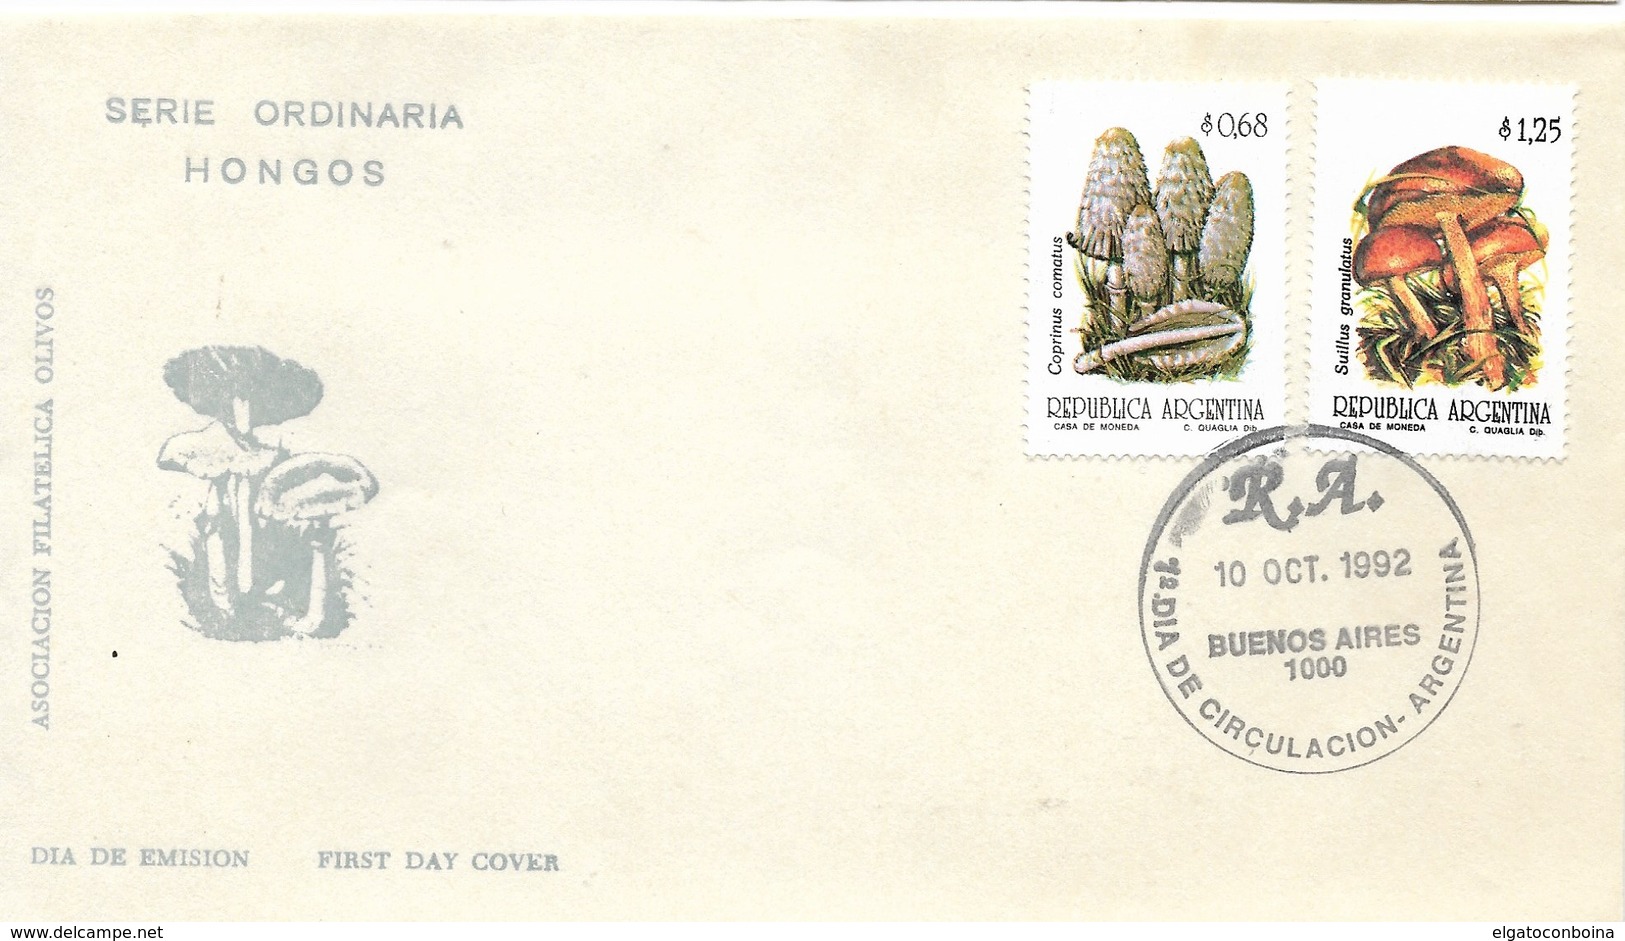 ARGENTINA 1992 SERIE HONGOS MUSHROOMS 2 VALUES ON FIRST DAY COVER FDC SPD - FDC